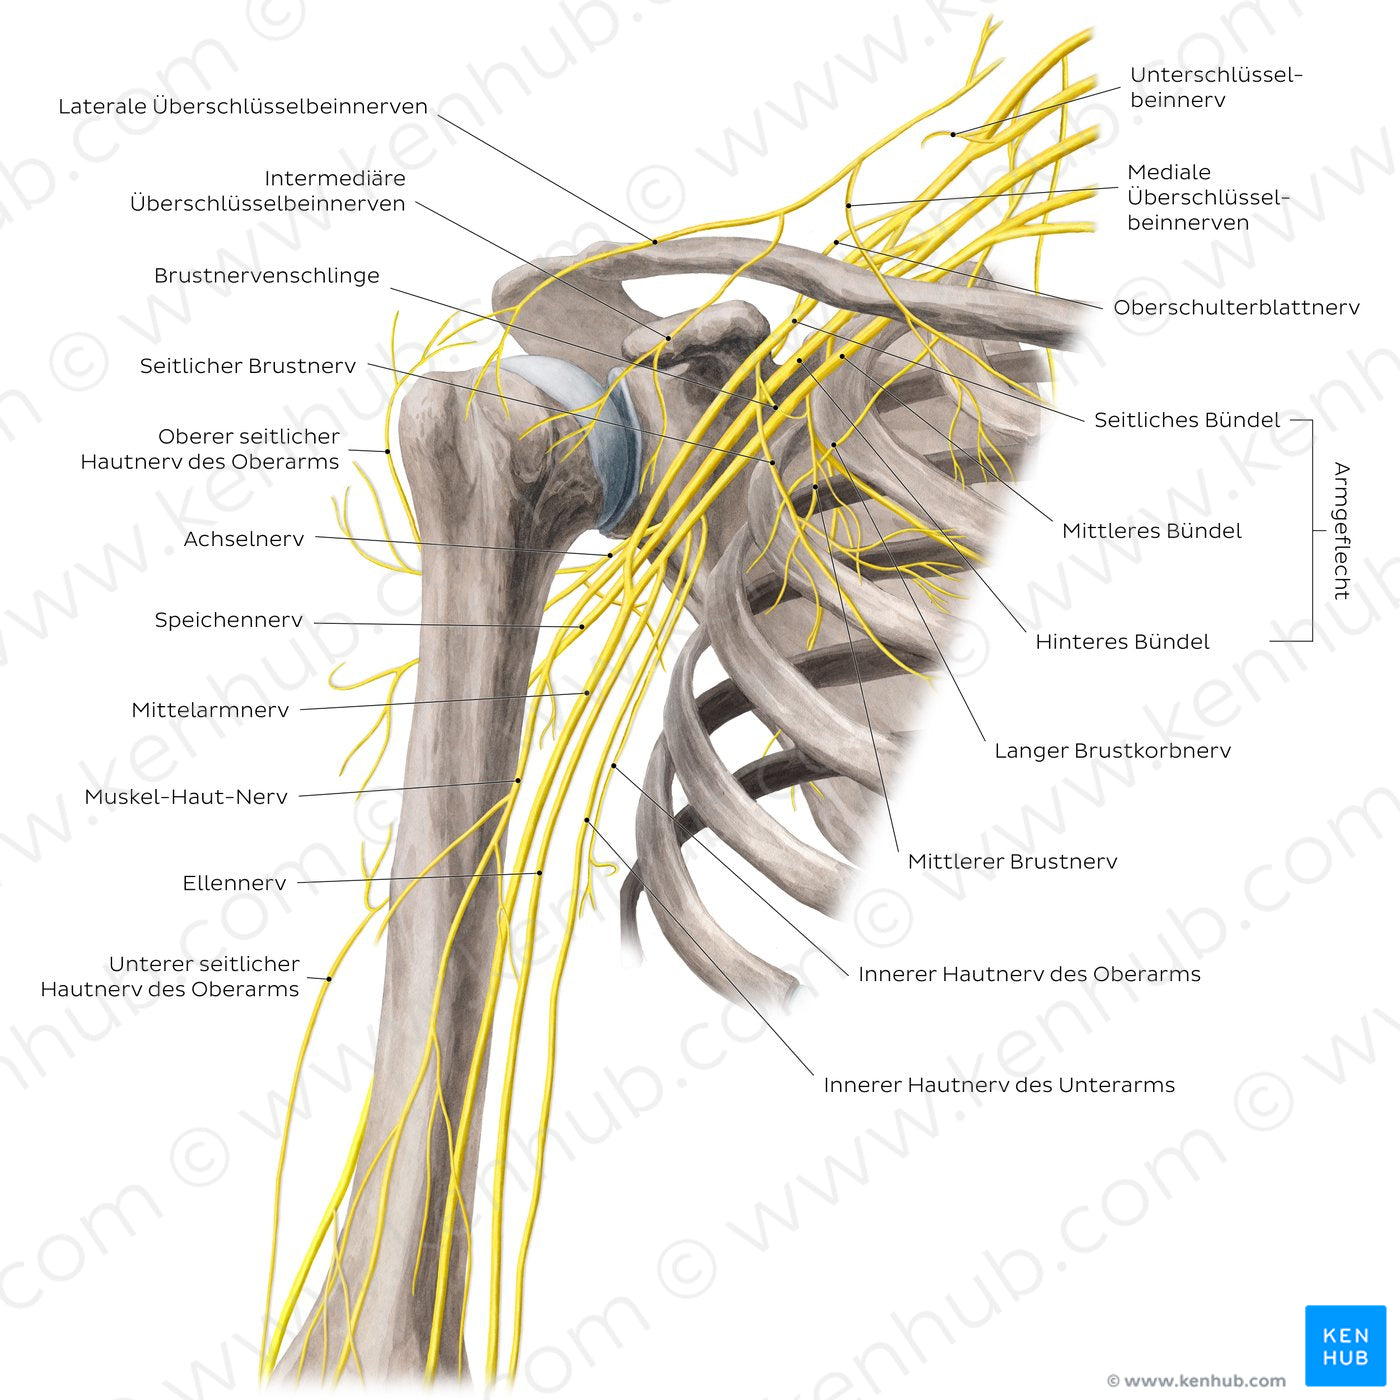 Nerves of the arm and the shoulder - Anterior view (German)